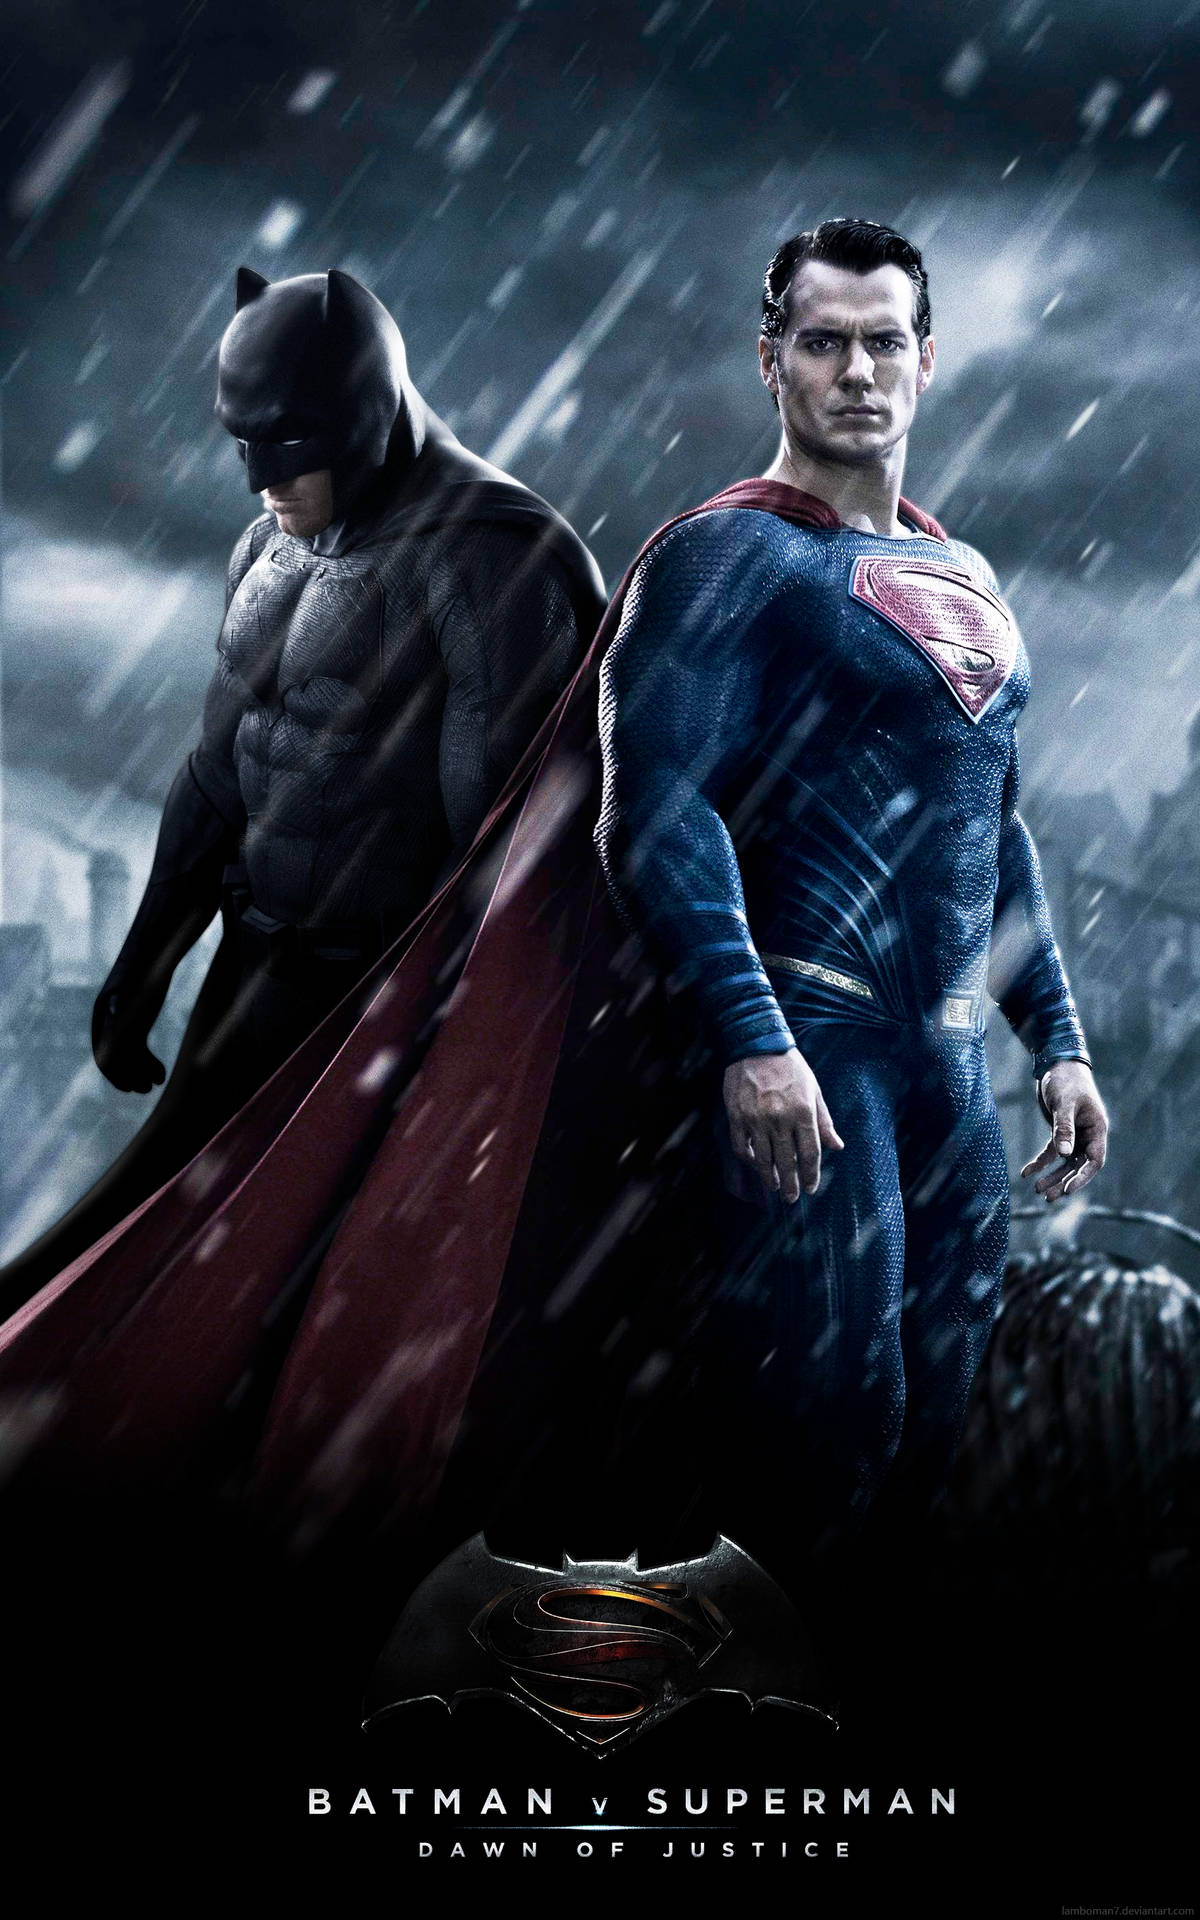 Batmanv Superman Dawn Of Justice Fängslande Poster (as A Native Swedish Speaker, I Would Maintain The Original Title In English Instead Of Translating It Into Swedish) Wallpaper